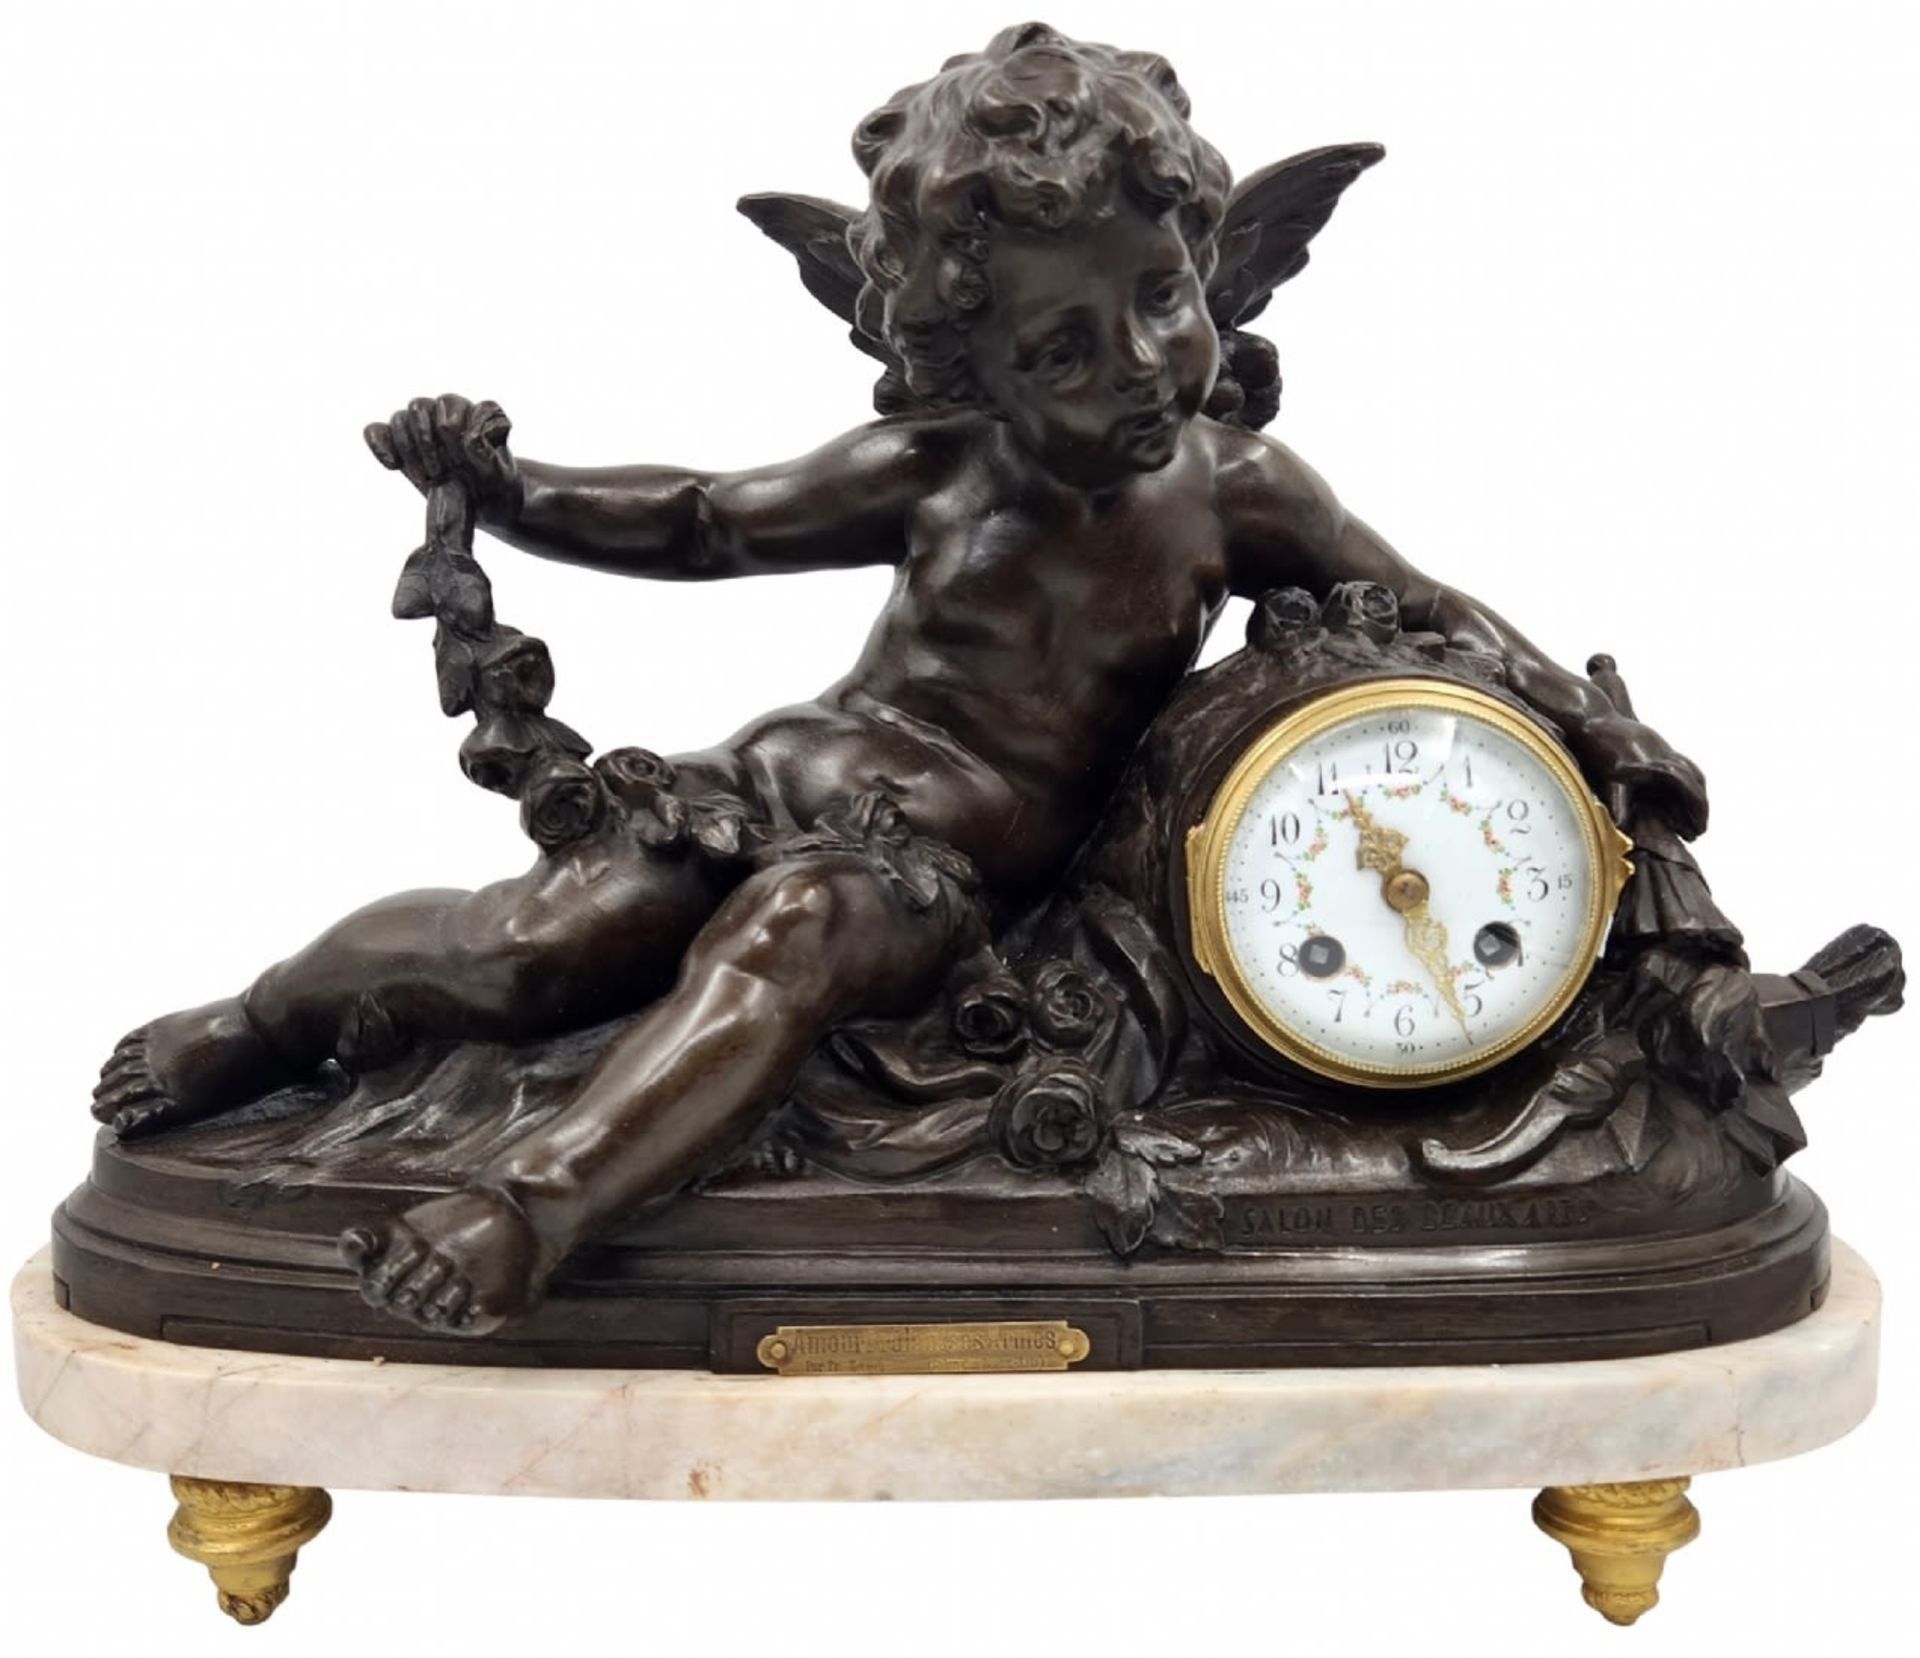 Antique French mantel clock, based on Hippolyte Francois Moreau work (French sculptor who lived